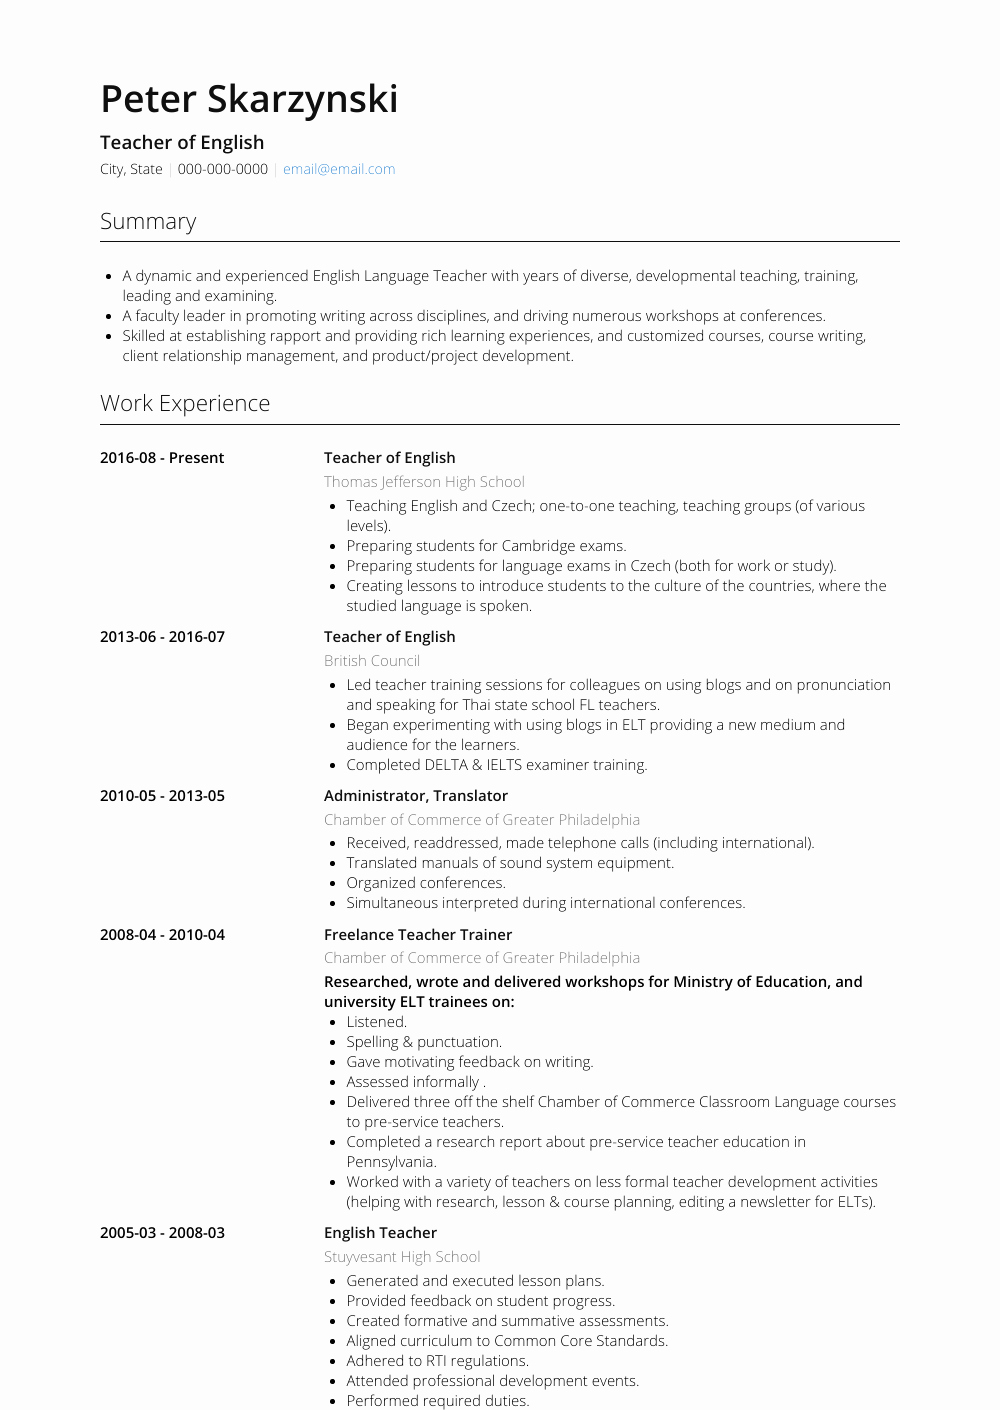 Resume Template for Teaching Best Of English Teacher Resume Samples and Templates